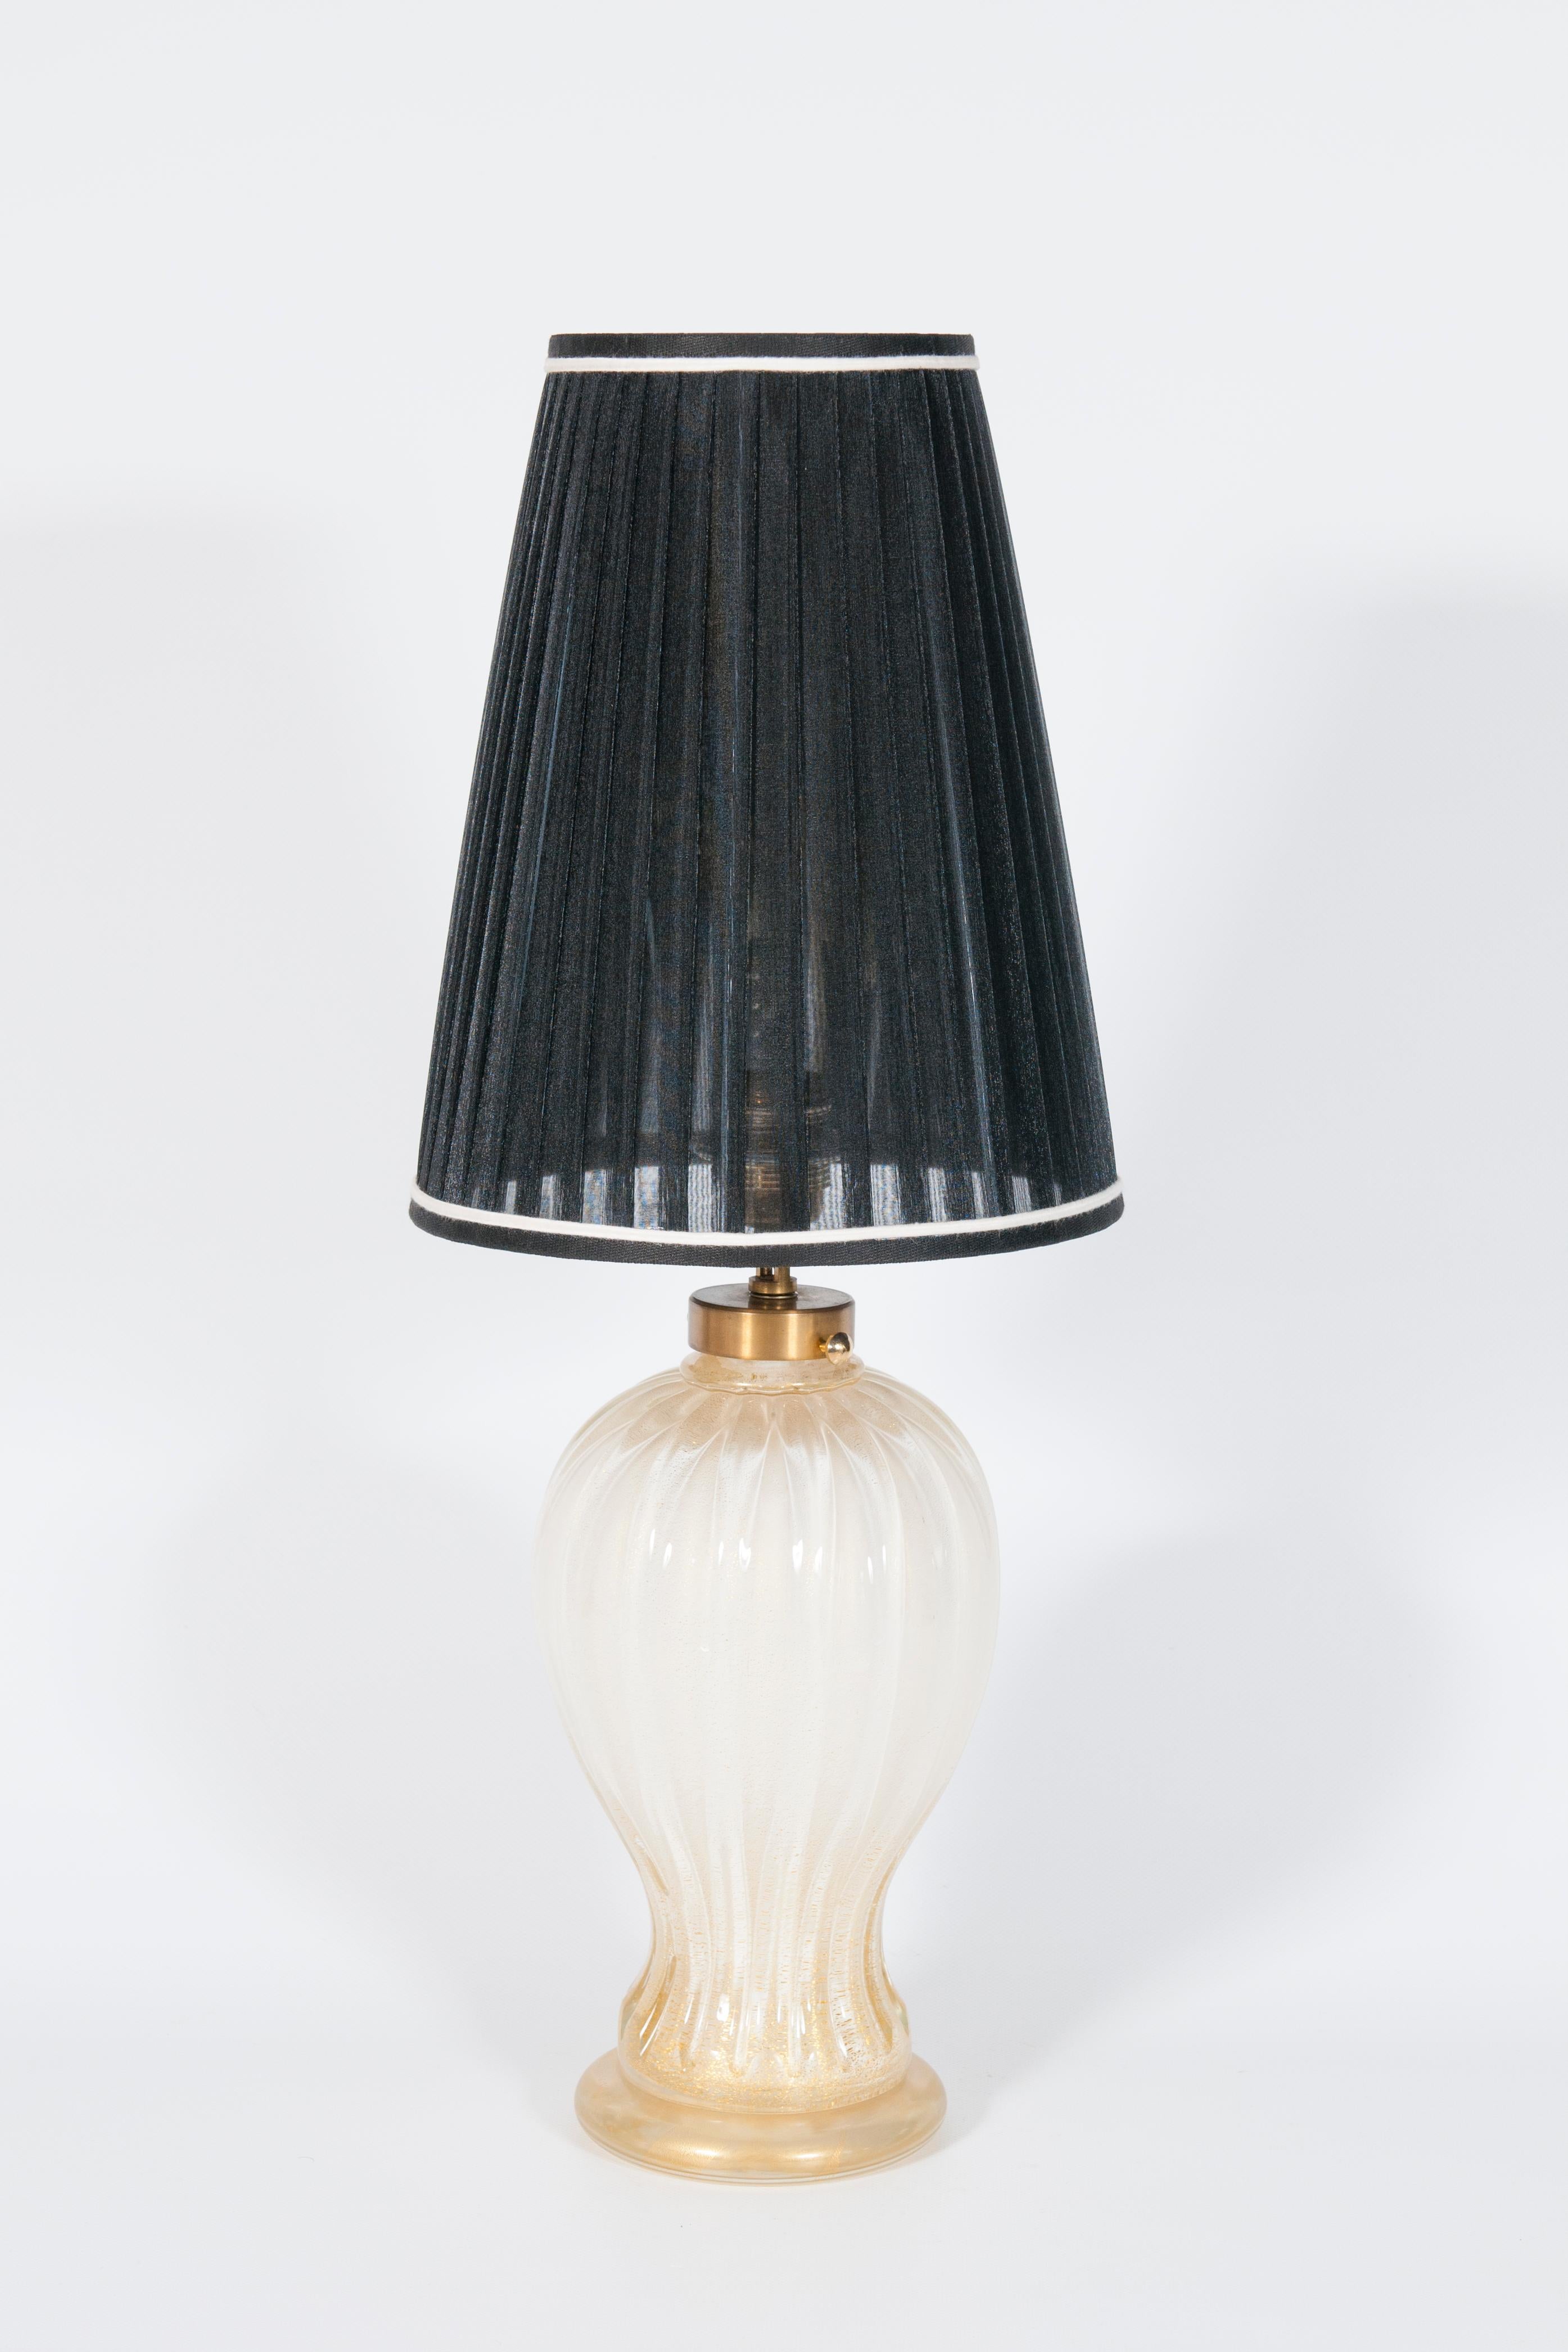 Milk White Italian Table Lamp with 24-Karat Gold in blown Murano glass, 1970s
Exquisite and very elegant table lamp in blown Murano glass, which manufacture is dated circa 1970s. It features a ribbed milk-white main body in Murano glass, with a very